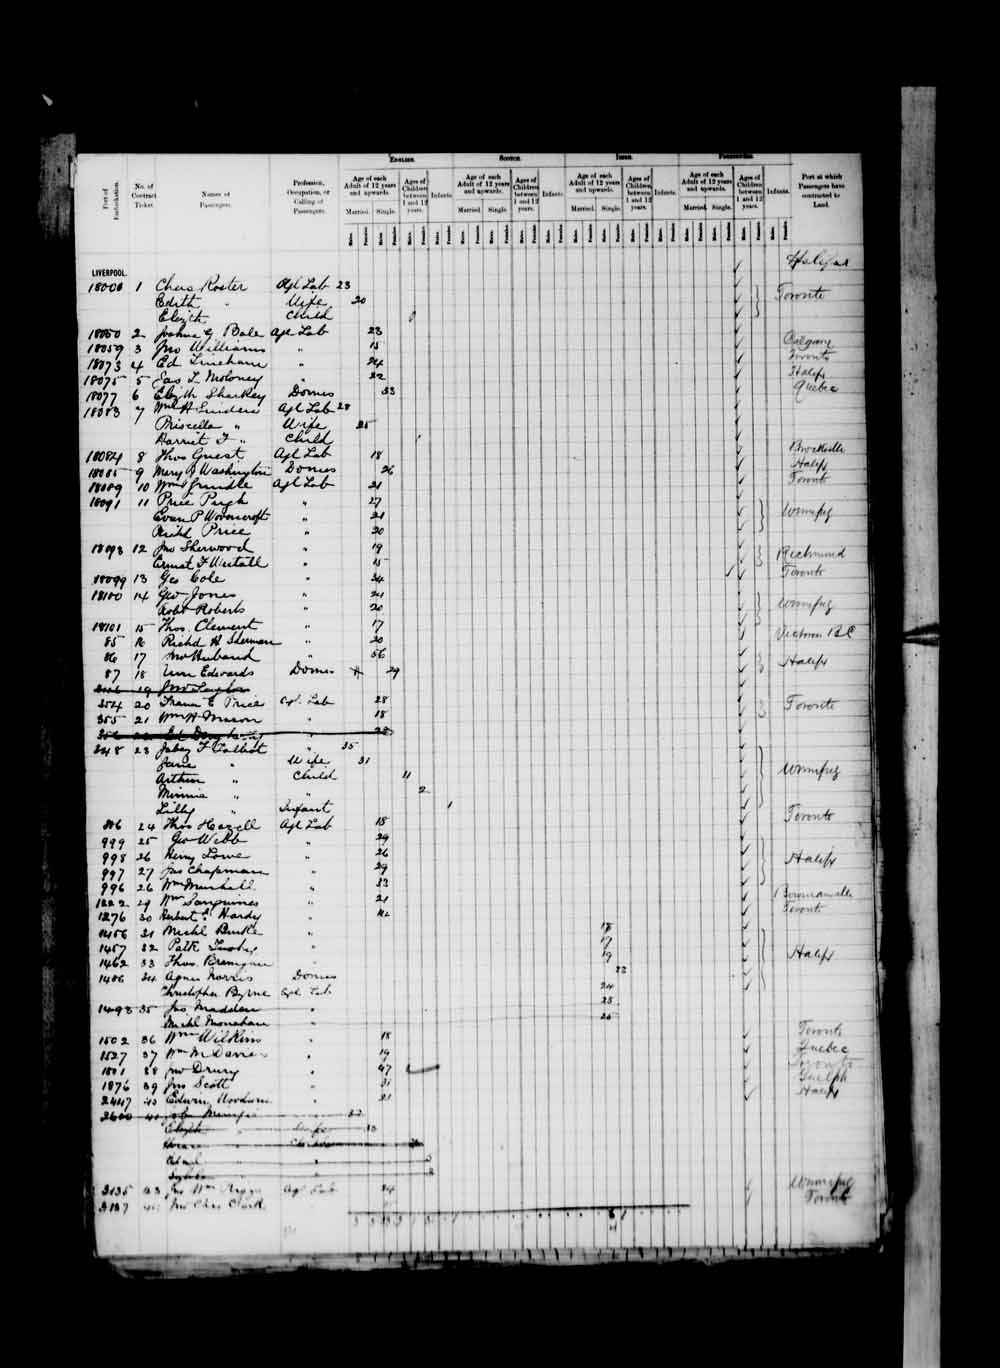 Digitized page of Passenger Lists for Image No.: e003674947